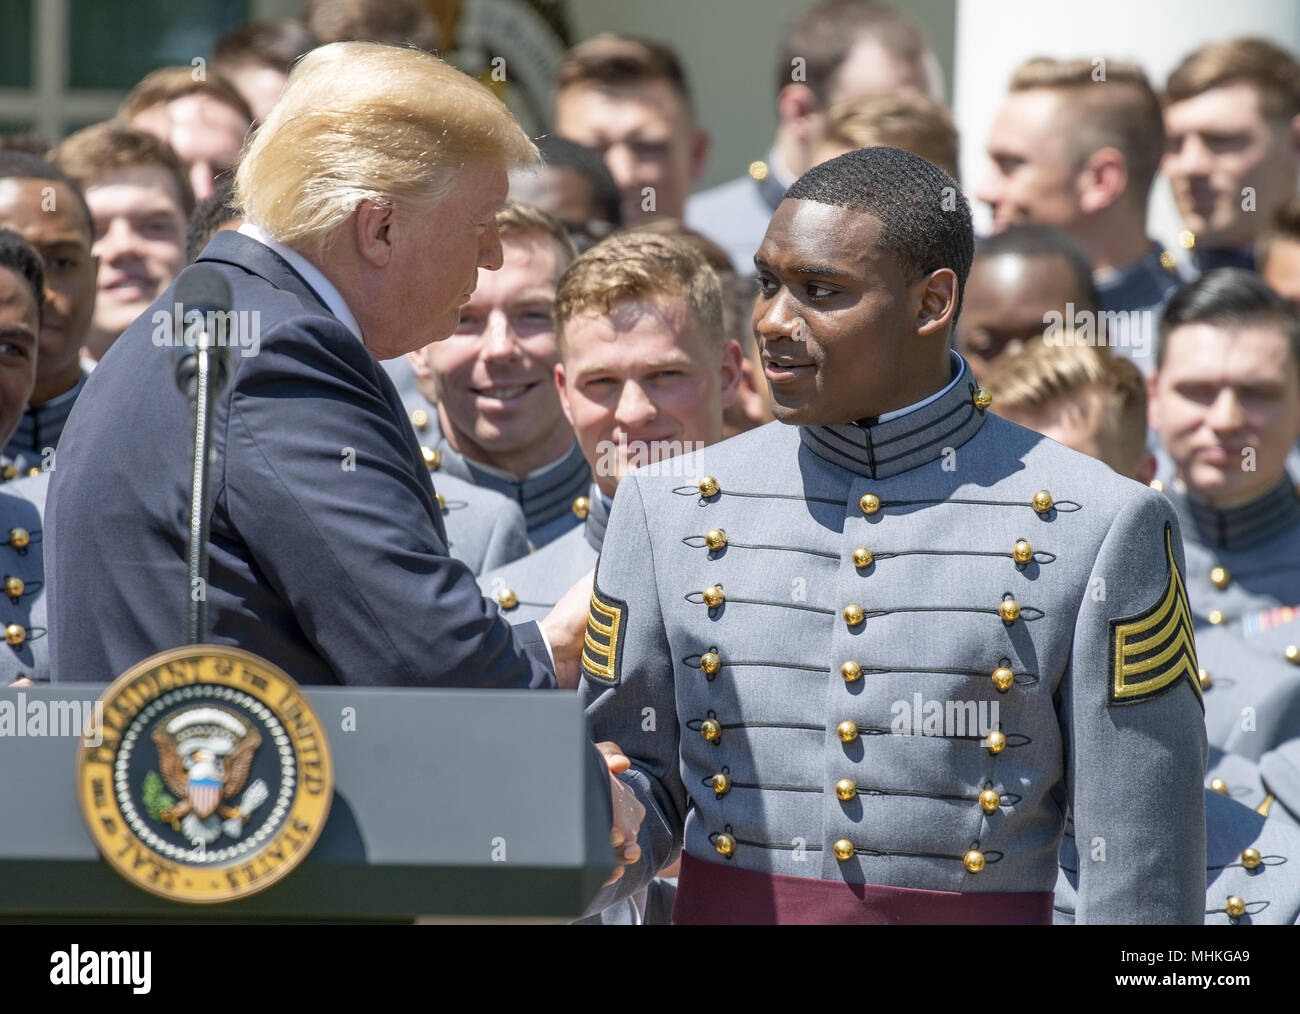 United States President Donald J. Trump recognizes quarterback and co-Captain Ahmad Bradshaw (17) as he presents the Commander-in-Chief's Trophy to the U.S. Military Academy football team in the Rose Garden of the White House in Washington, DC on Tuesday, May 1, 2018. The Commander-in-Chief's trophy is presented to the winner of the annual Army-Navy football game which was played at Lincoln Financial Field in Philadelphia, Pennsylvania on December 9, 2017. The Army Black Knights beat the Navy Midshipmen 14 - 13. Credit: Ron Sachs/CNP | usage worldwide Stock Photo